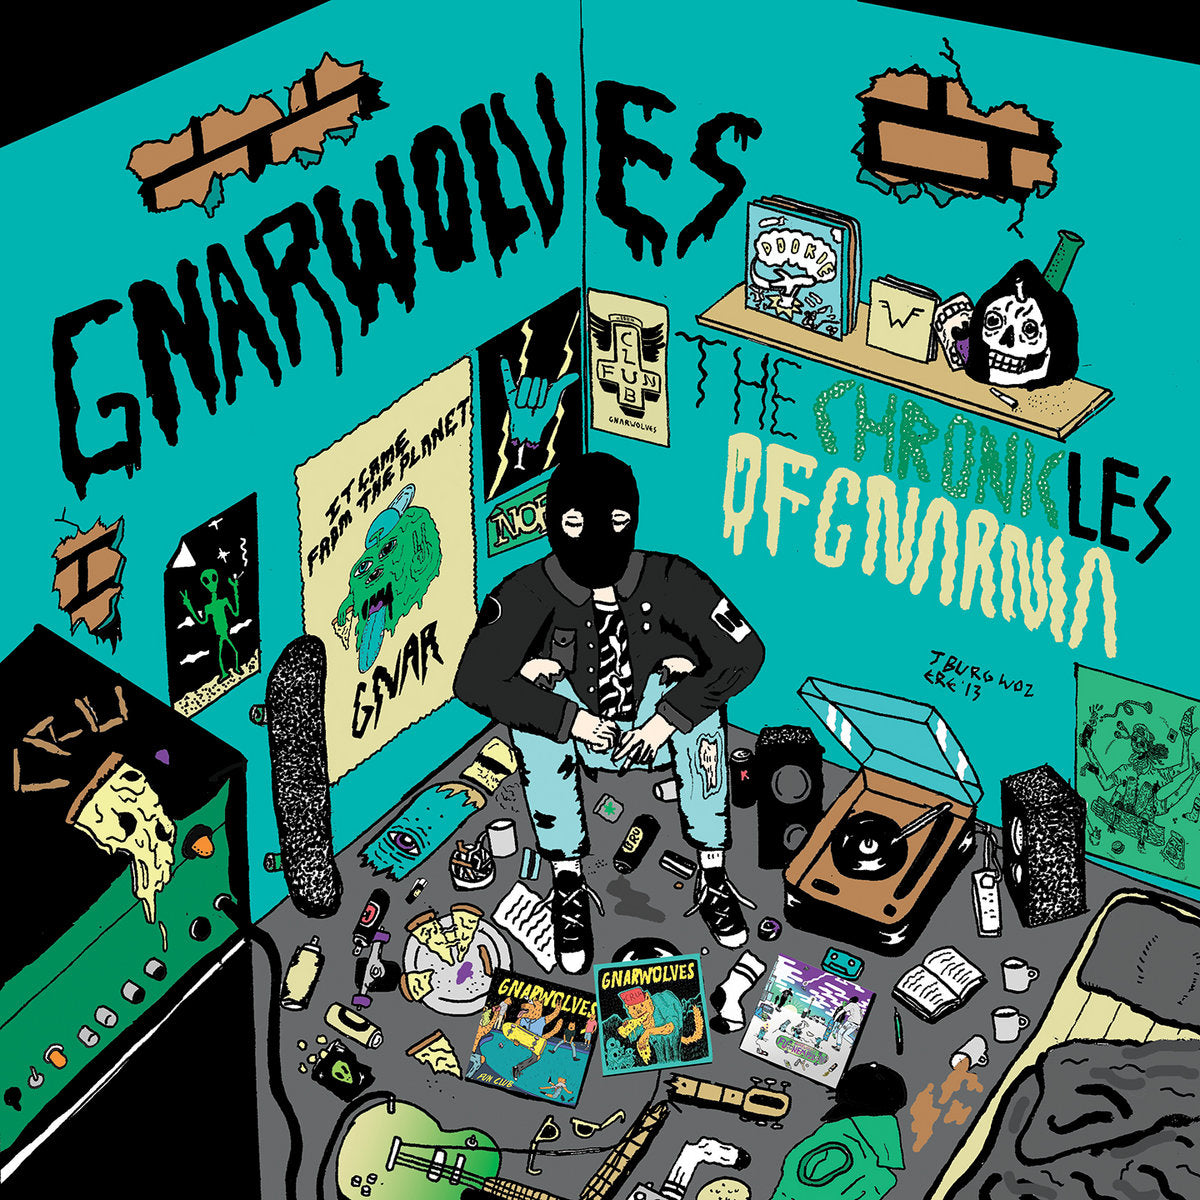 Gnarwolves "The Chronicles of Gnarnia" CD